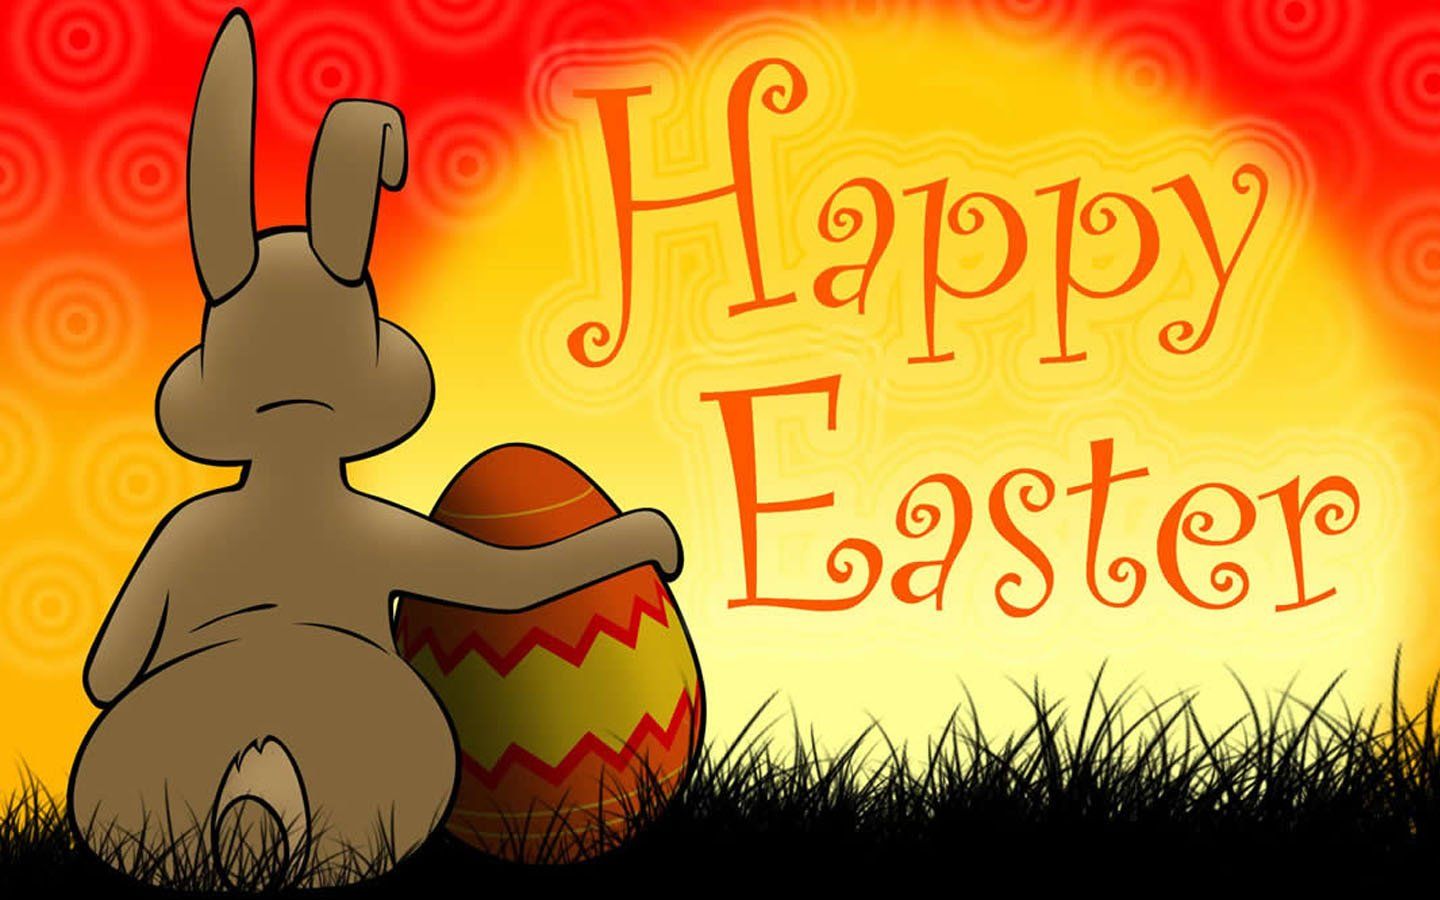 Happy Easter Image, Picture, Pics, Photo & Wallpaper in HD 2019